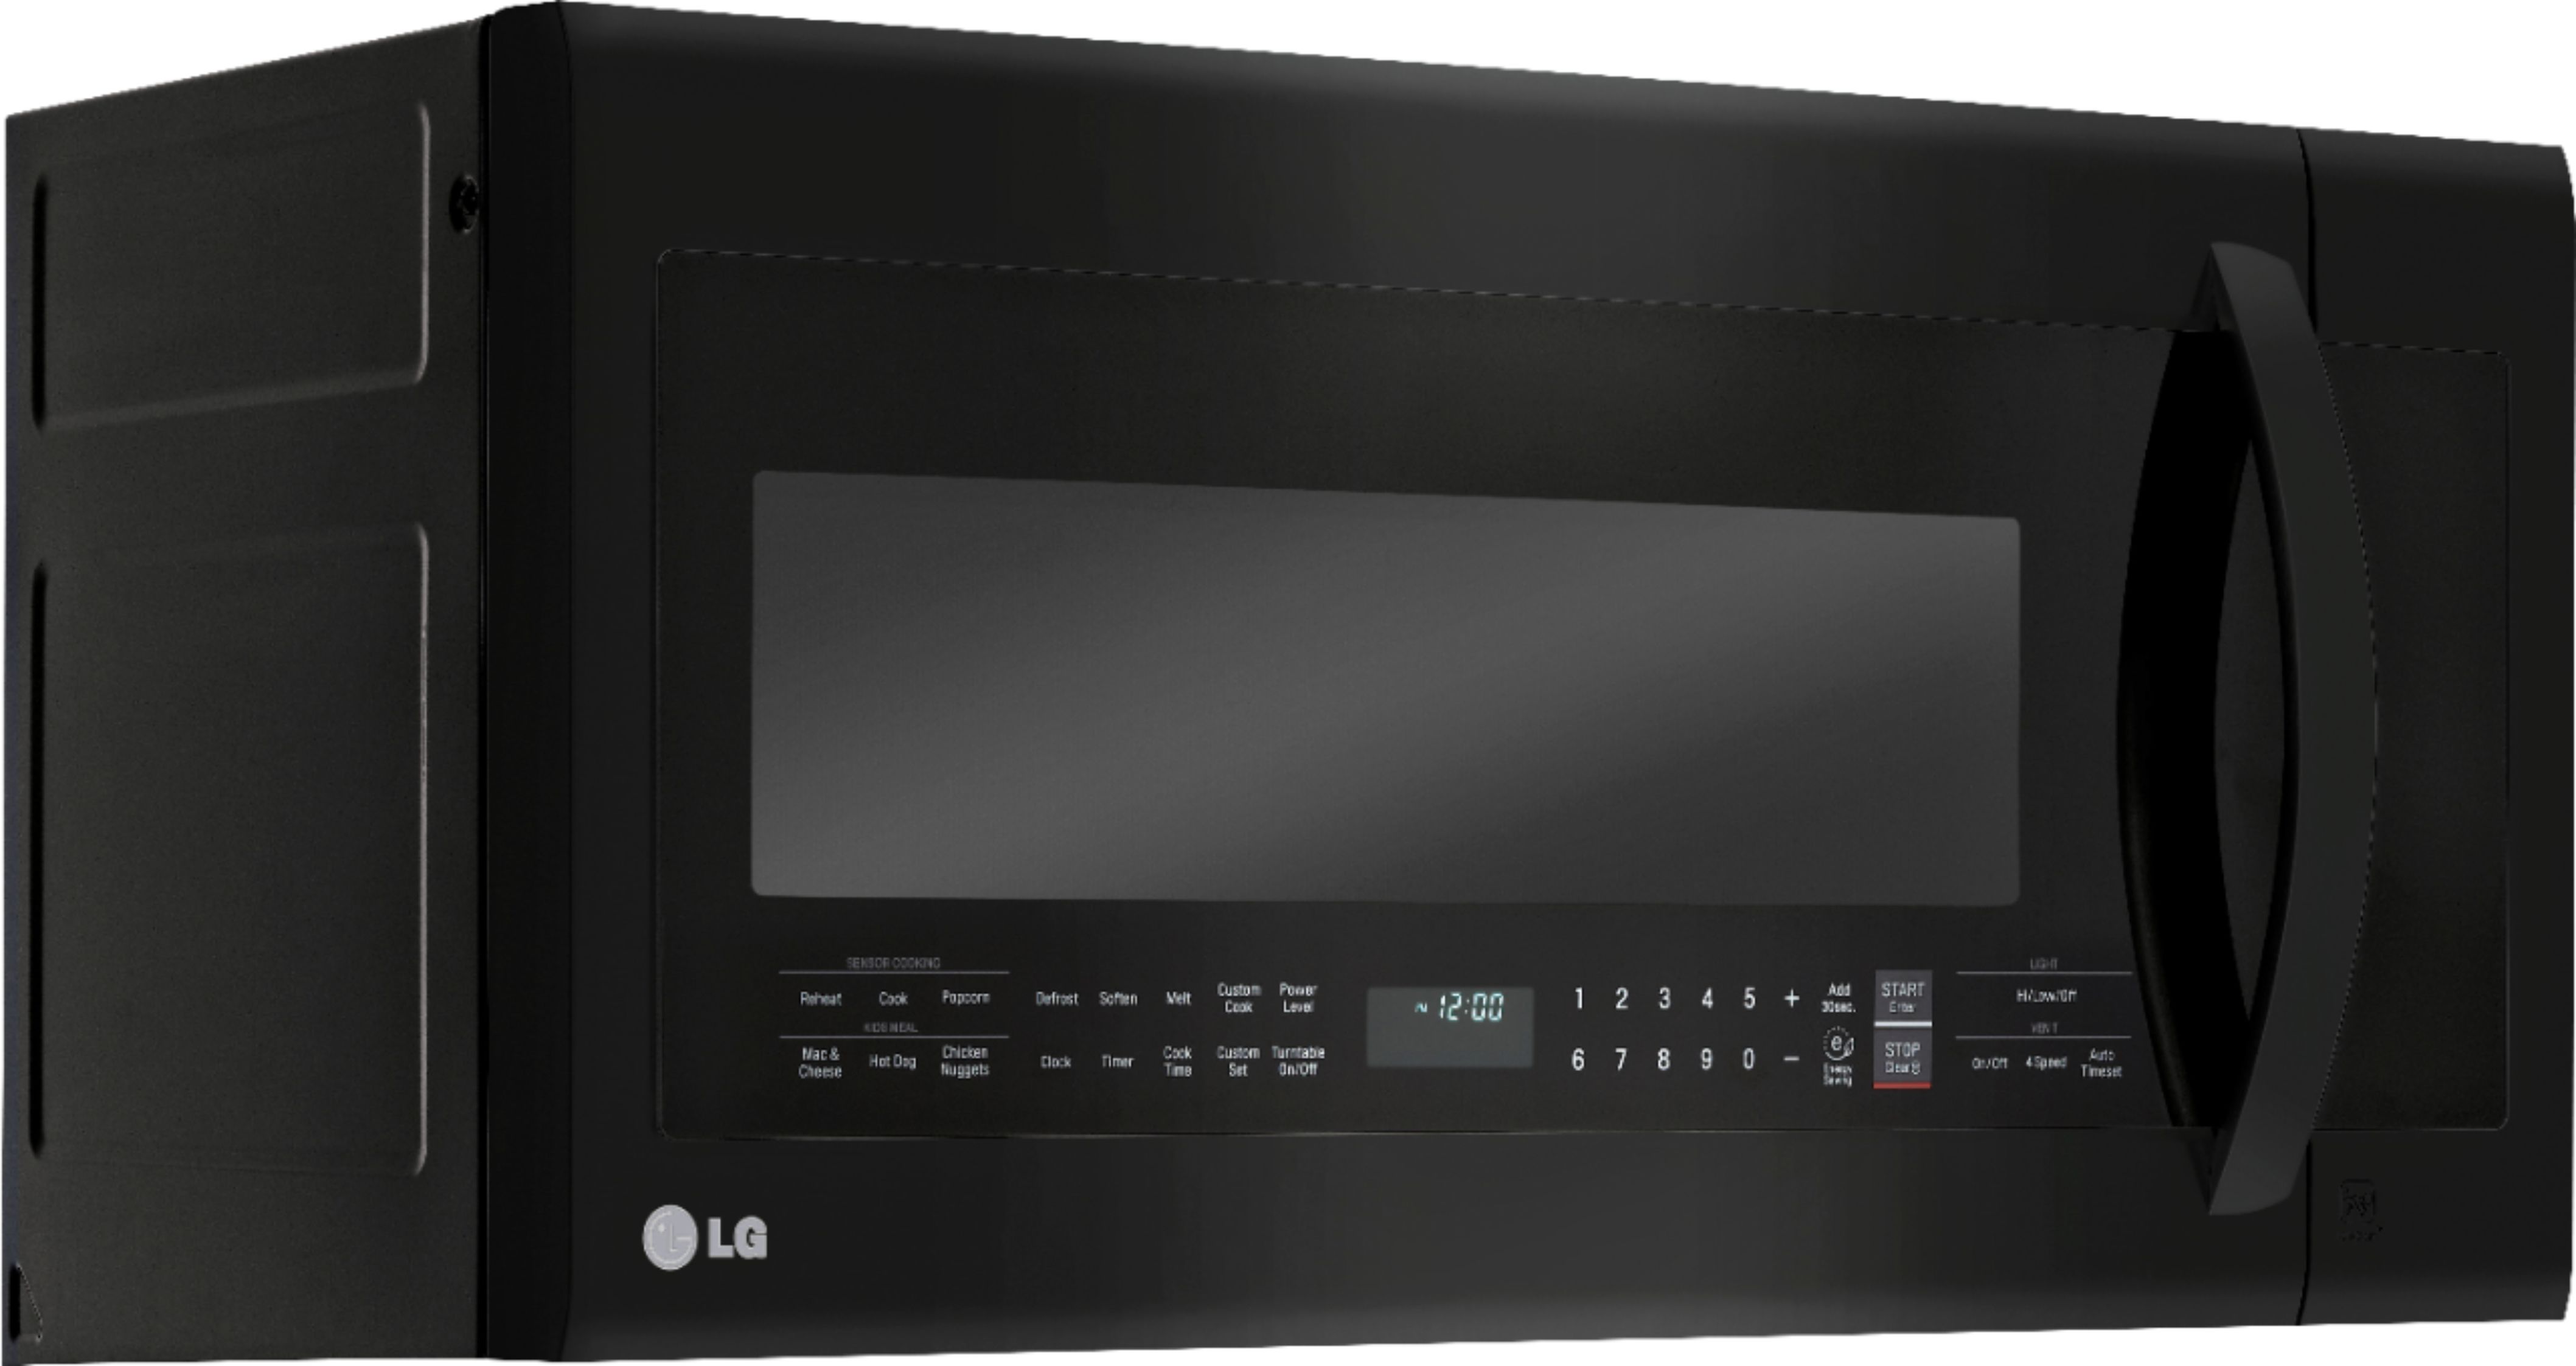 Angle View: LG - 2.0 Cu. Ft. Over-the-Range Microwave with Sensor Cooking - Matte black stainless steel